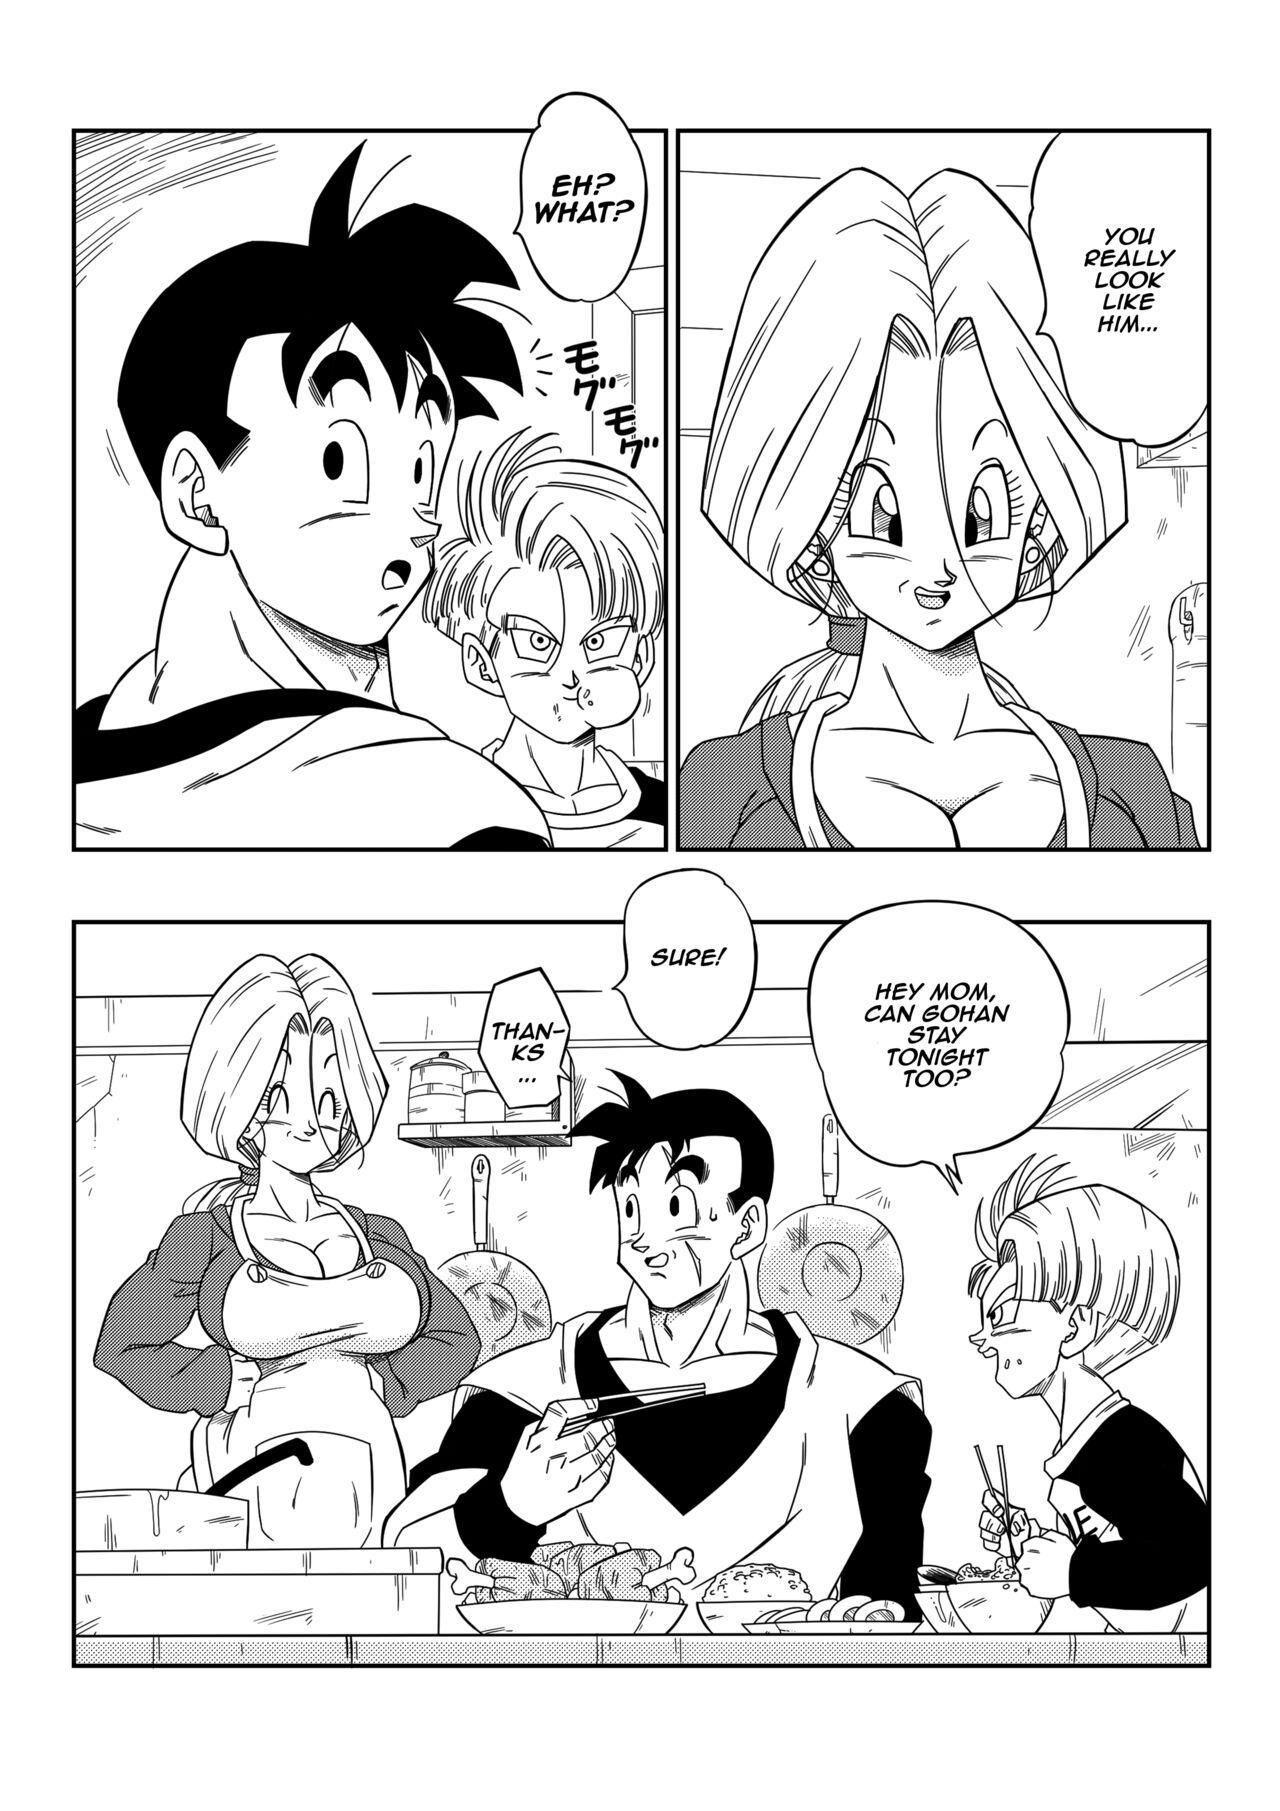 Girlfriend Lost of sex in this Future! - BULMA and GOHAN - Dragon ball z Foot Job - Picture 3